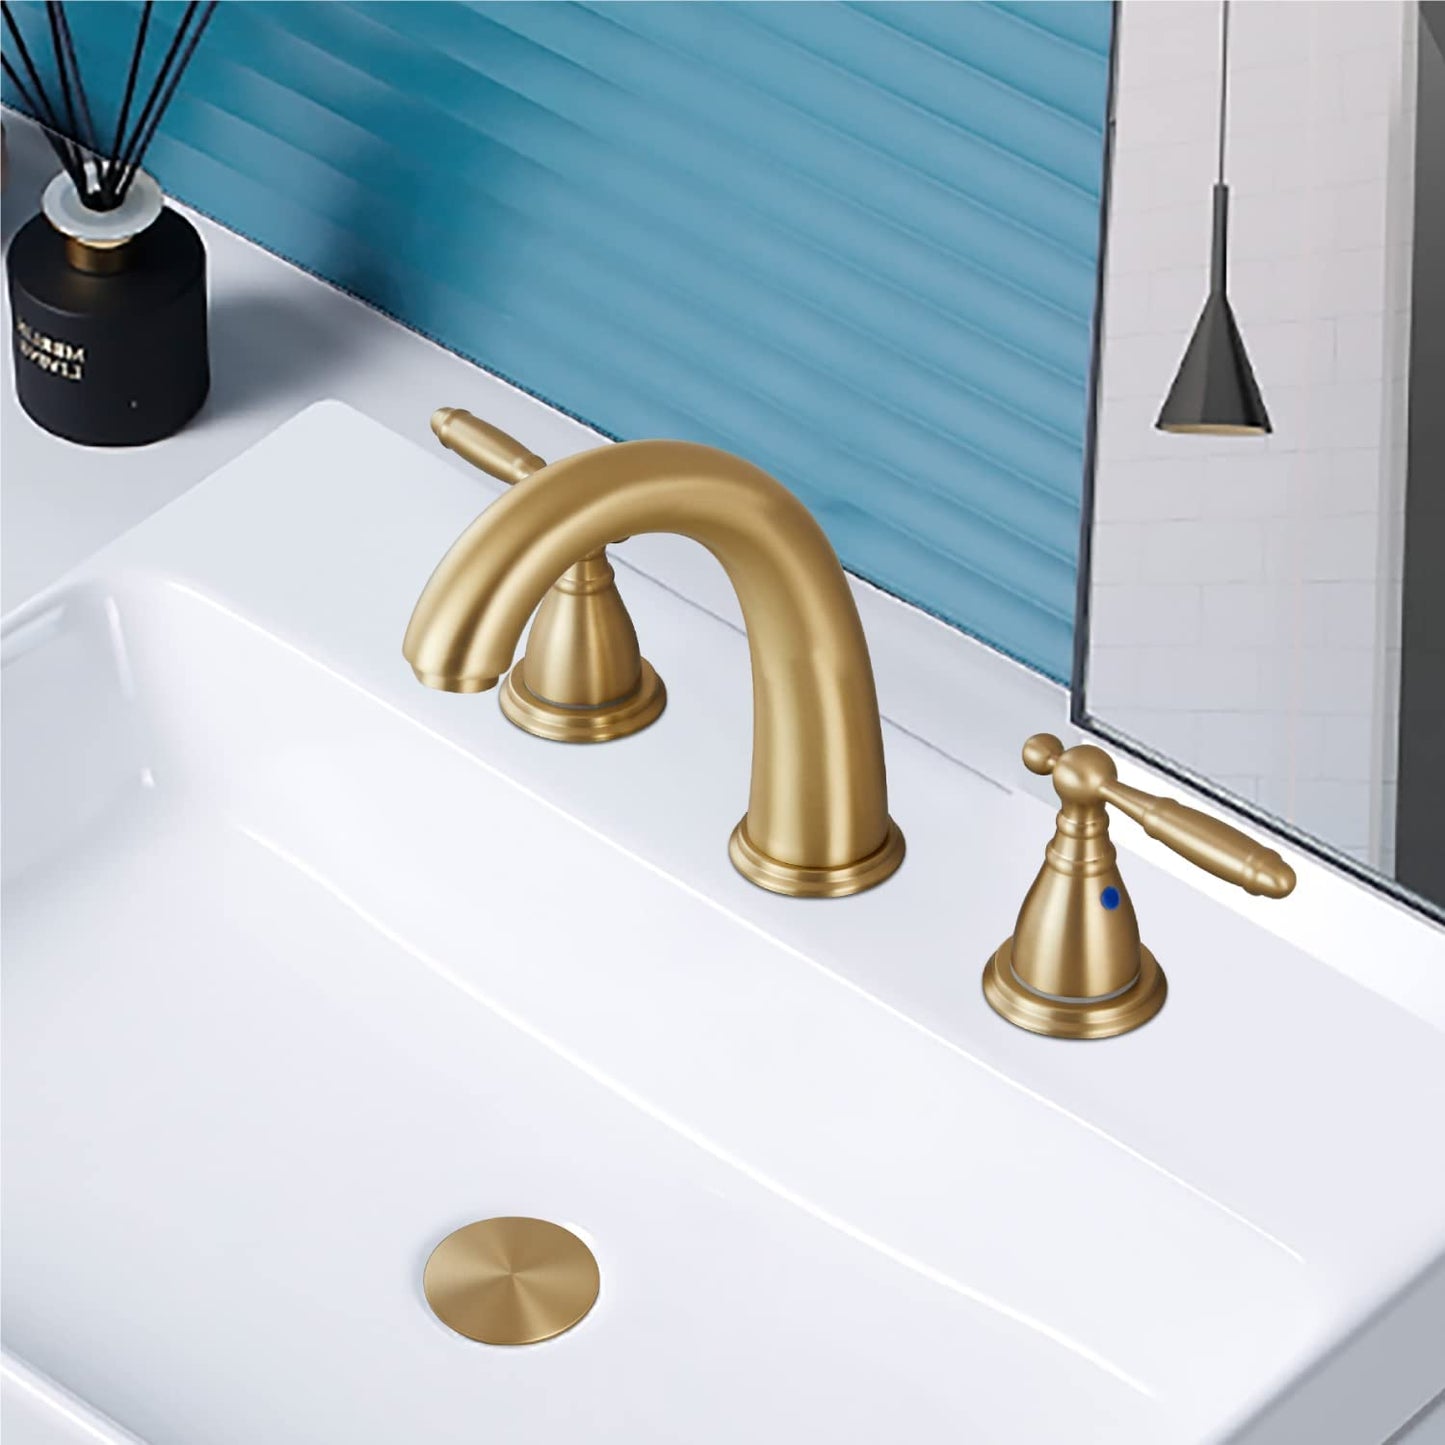 
                  
                    Cinwiny Widespread Bathroom Faucet Deck Mounted 8 Inch 3 Holes Brass Valve Sink Vanity SUS304 Faucet Double Handles Mixer Tap with Pop up Drain and Water Supply Hoses
                  
                